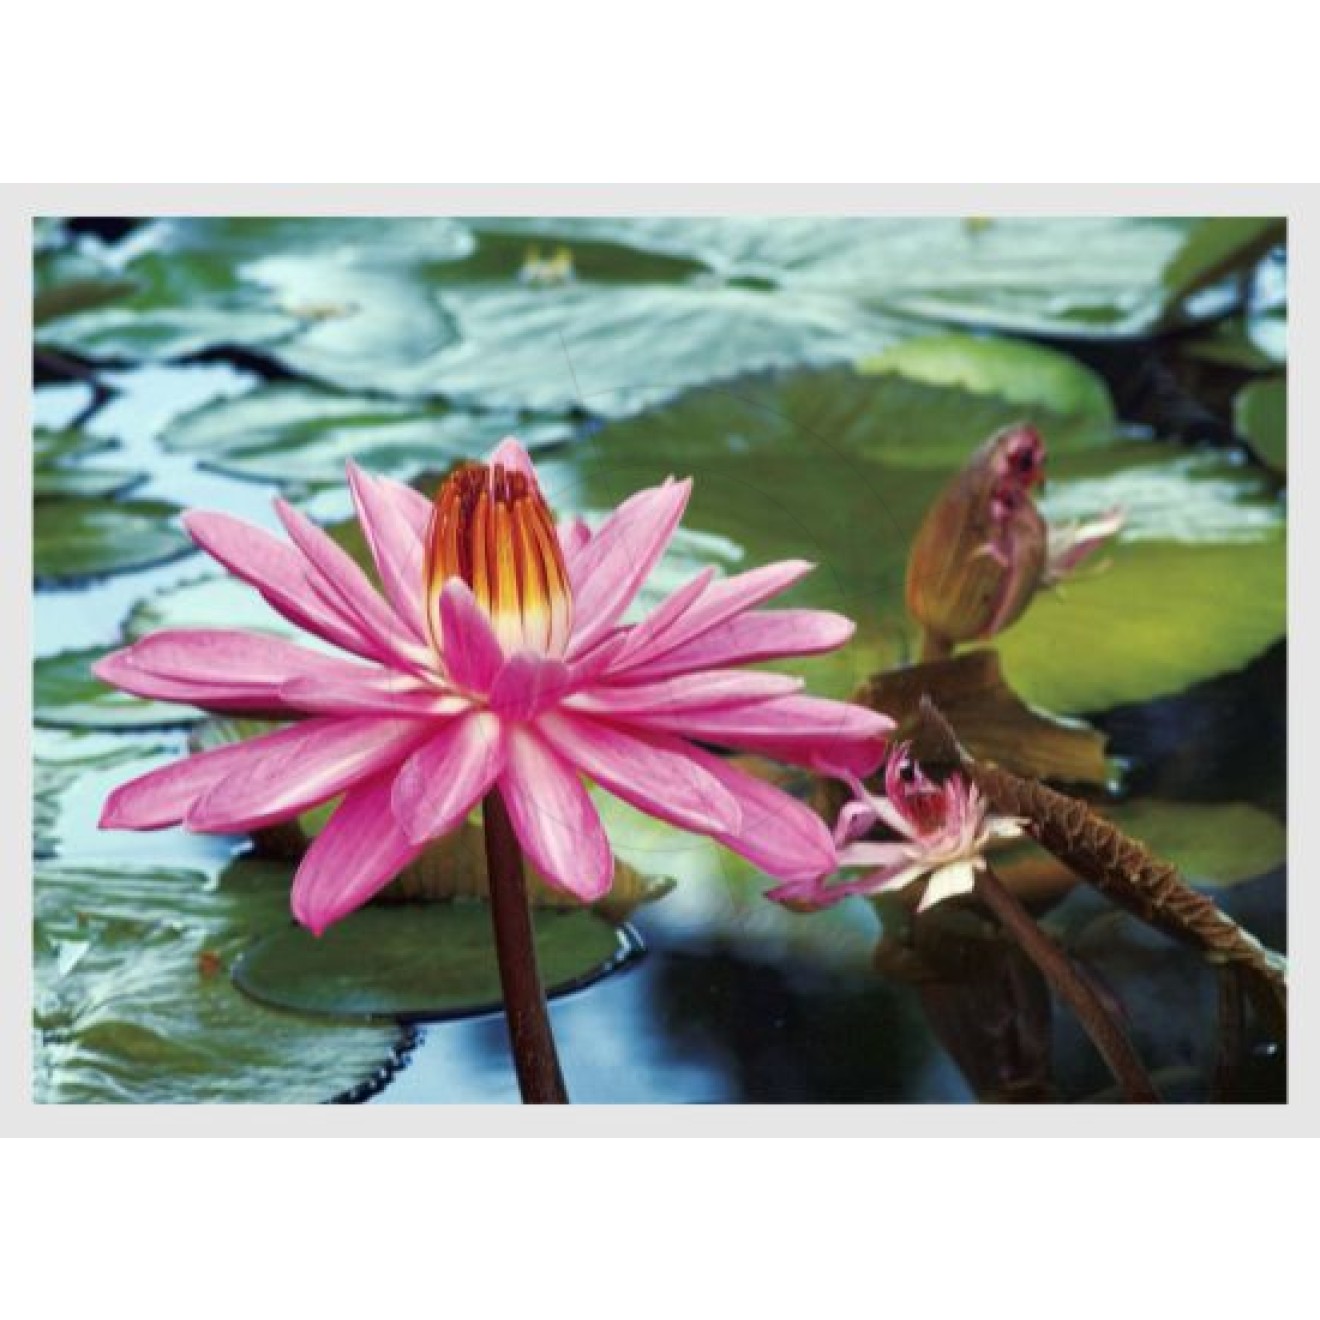 Water lily, Nymphaea, pink